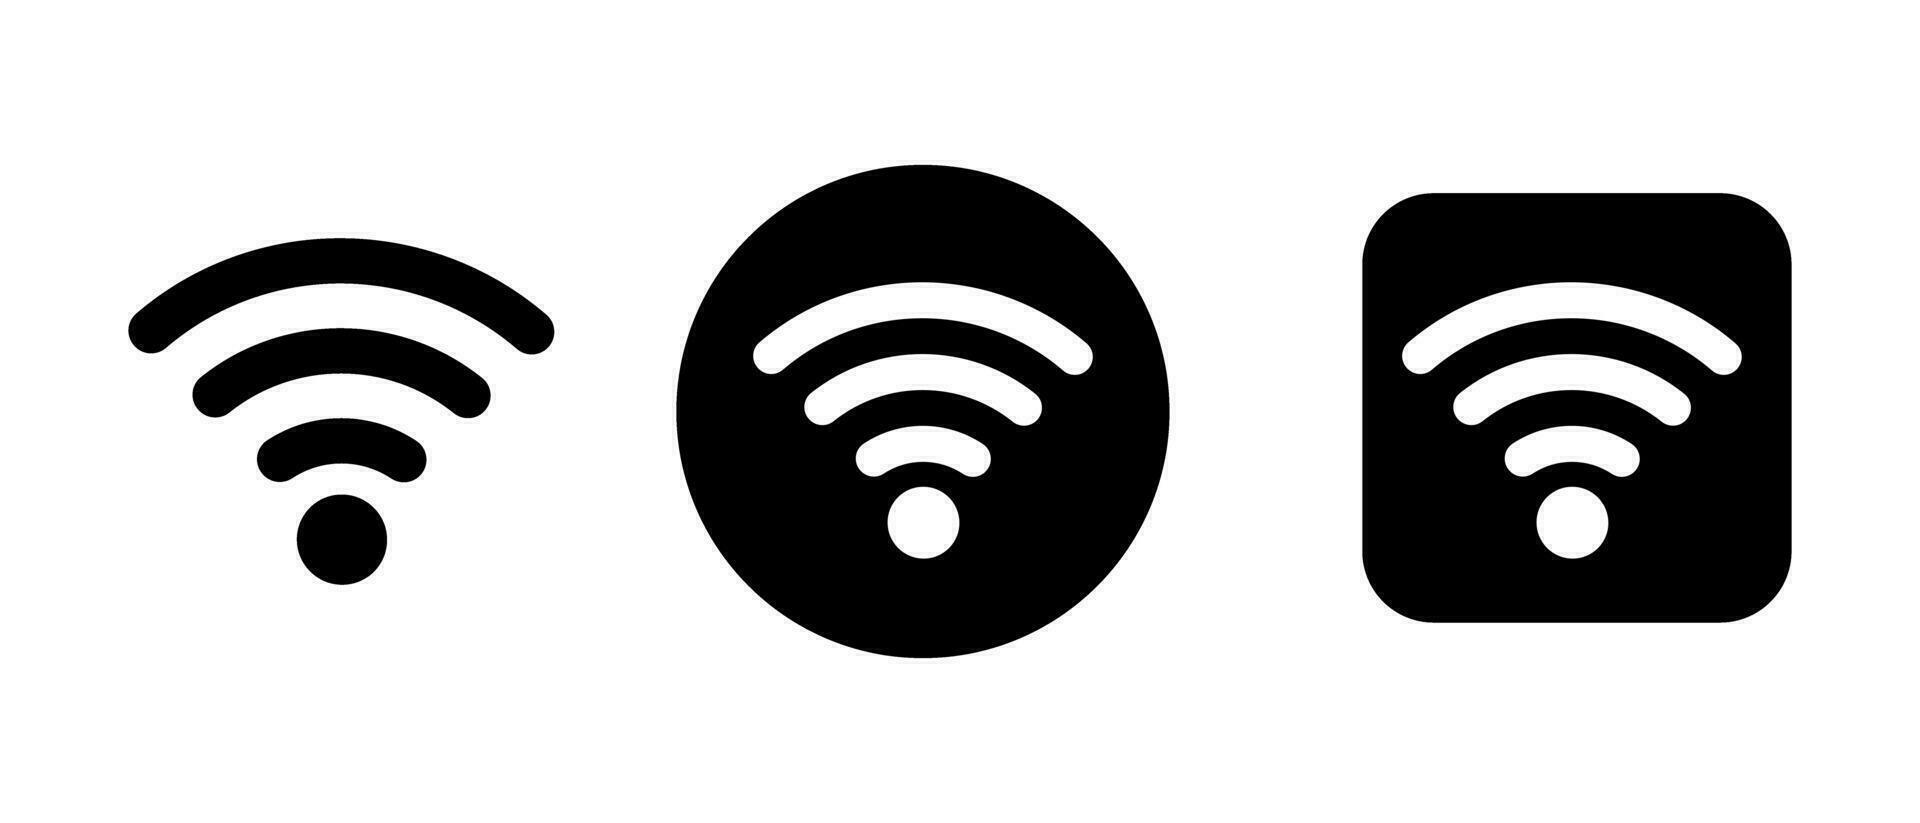 Wi-Fi icon set in various styles. Vectors. vector